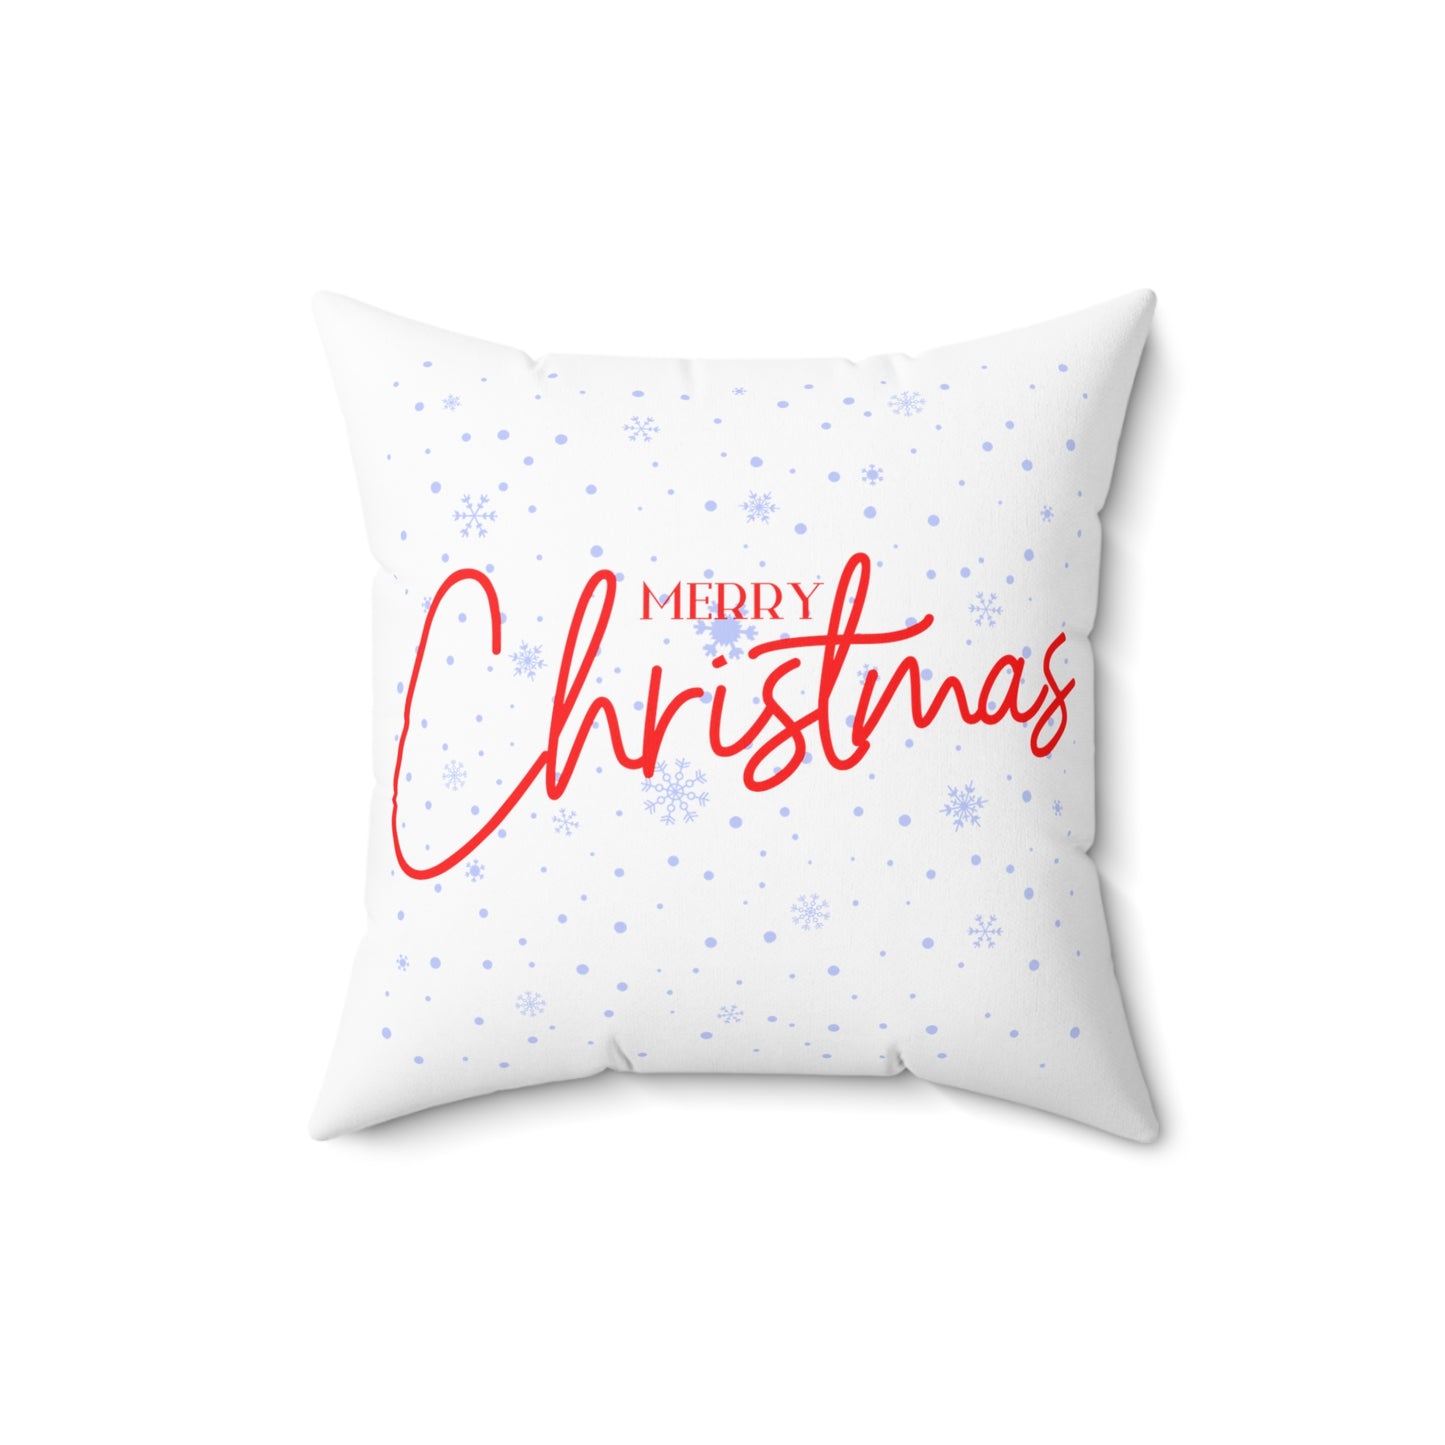 Merry Christmas Printed Square Pillow, White